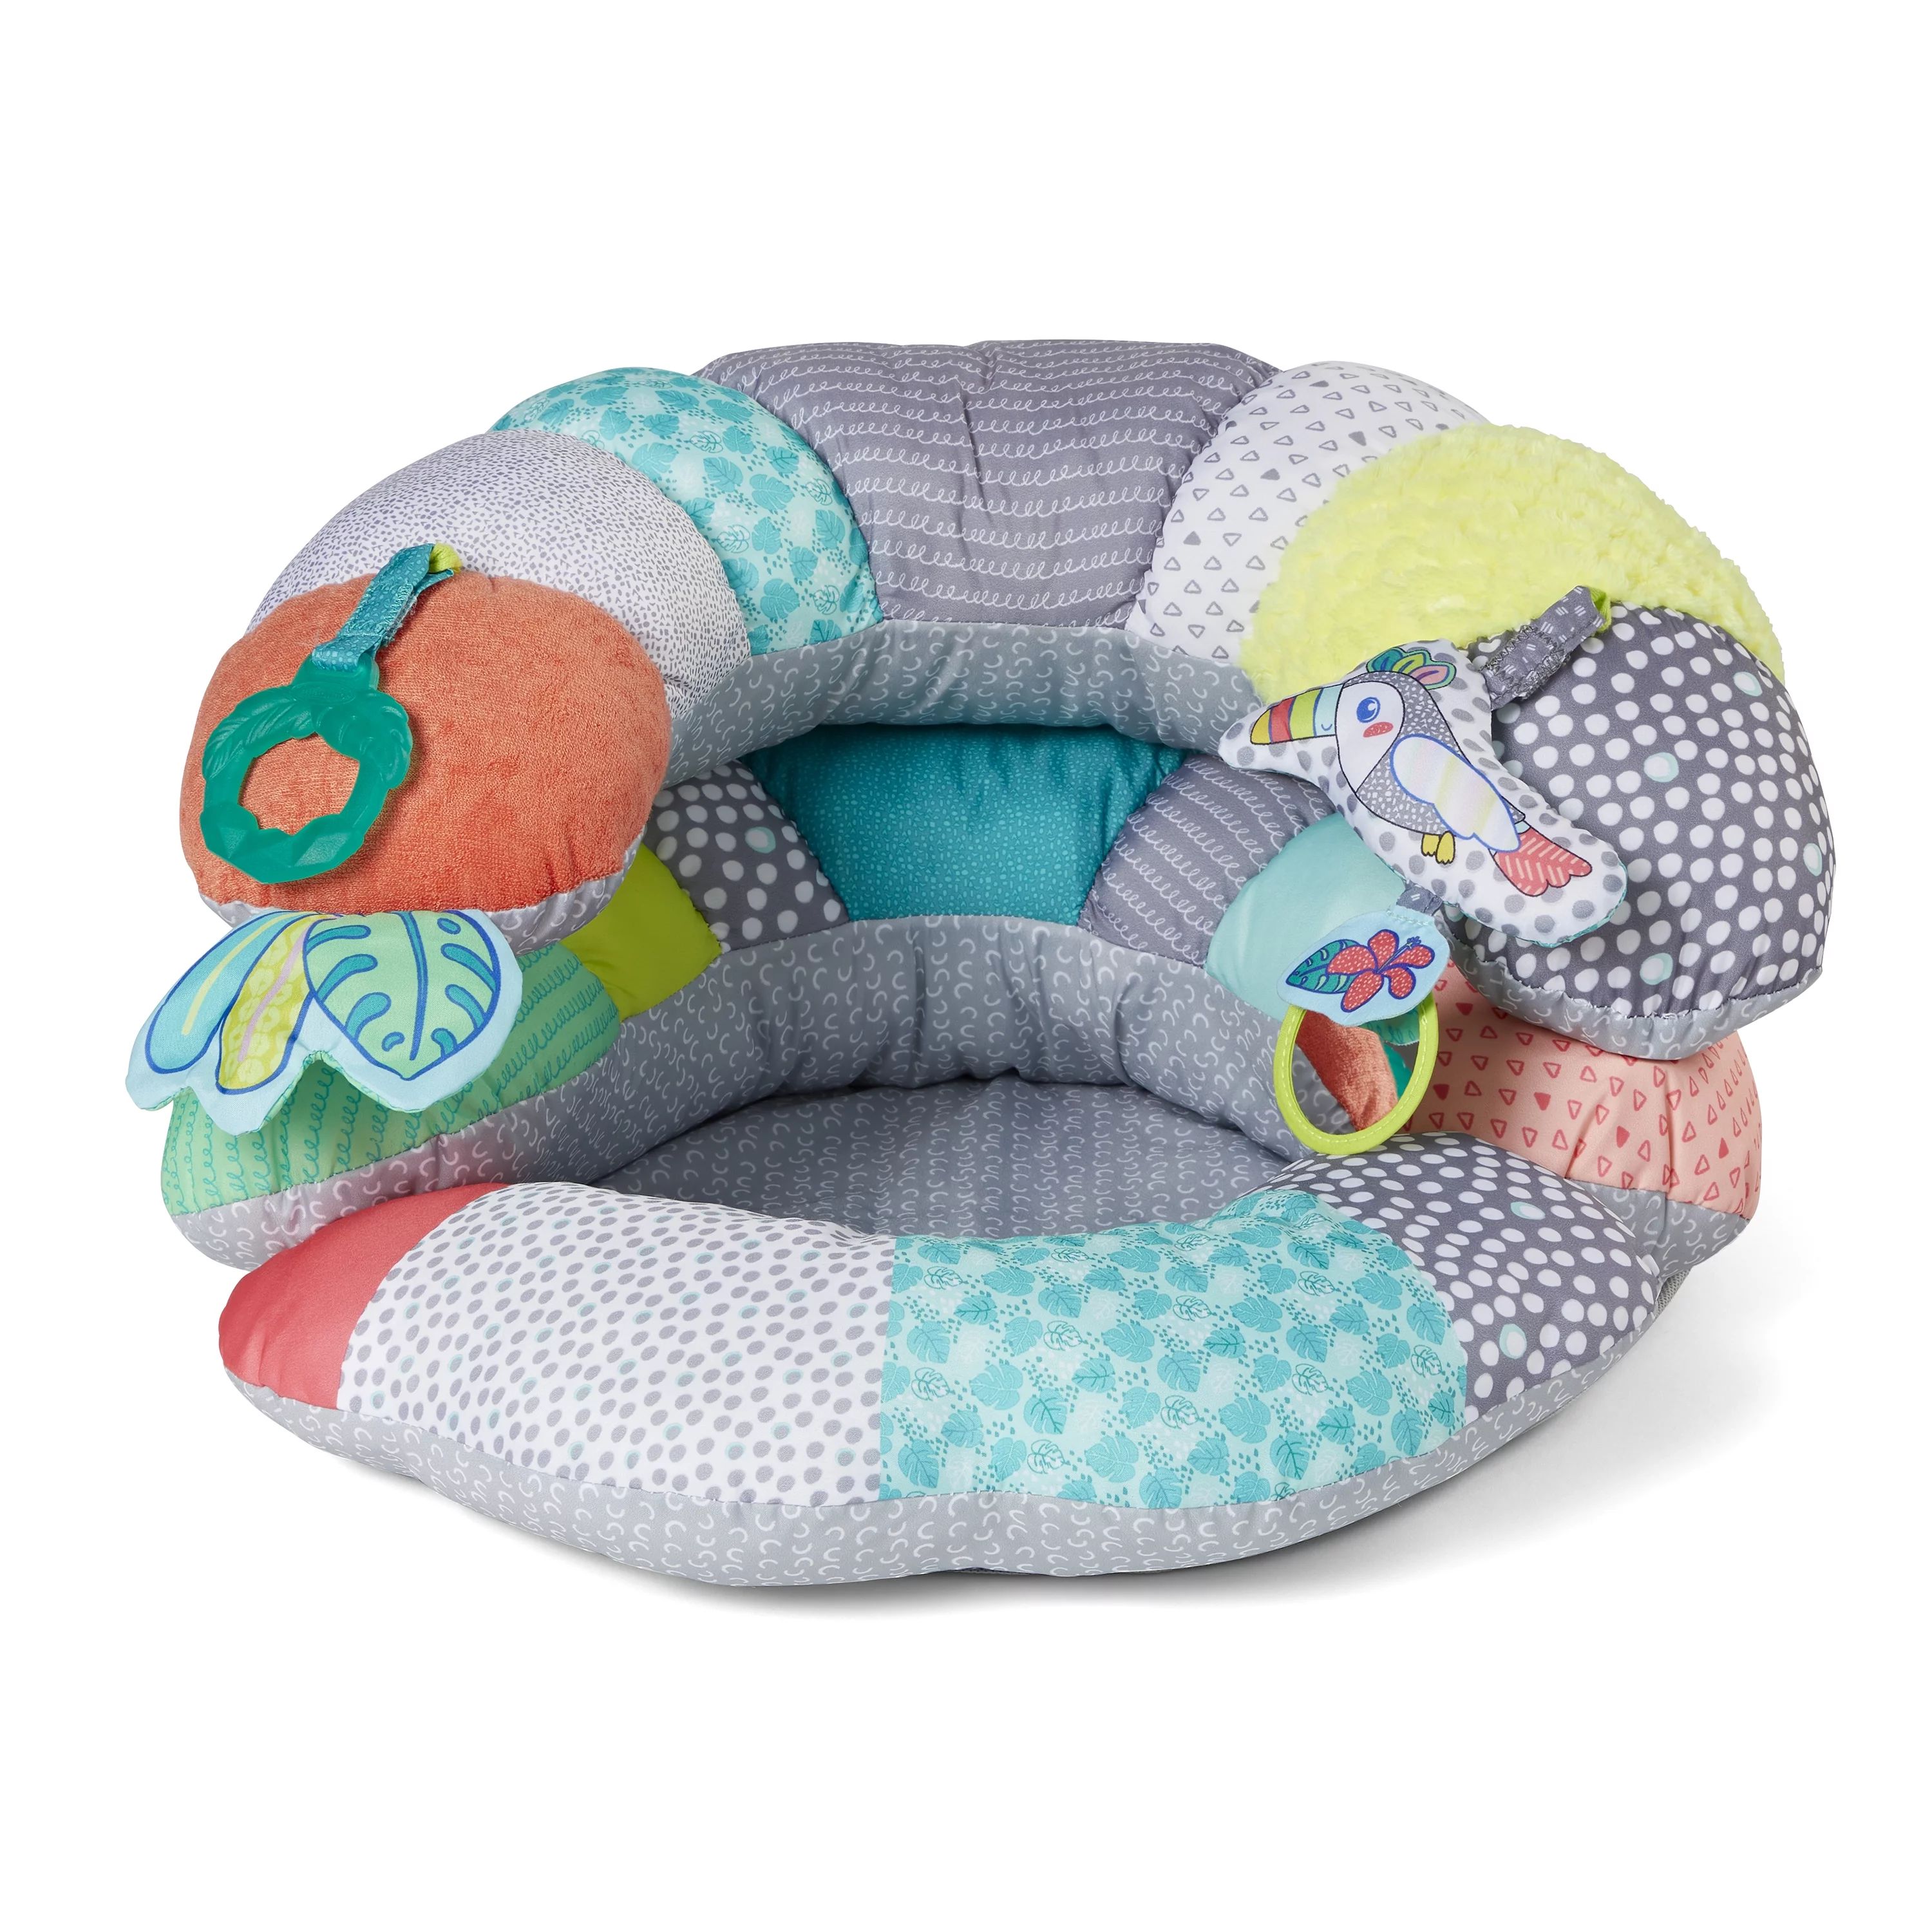 Infantino 2-in-1 Tummy Time & Seated Support - Walmart.com | Walmart (US)